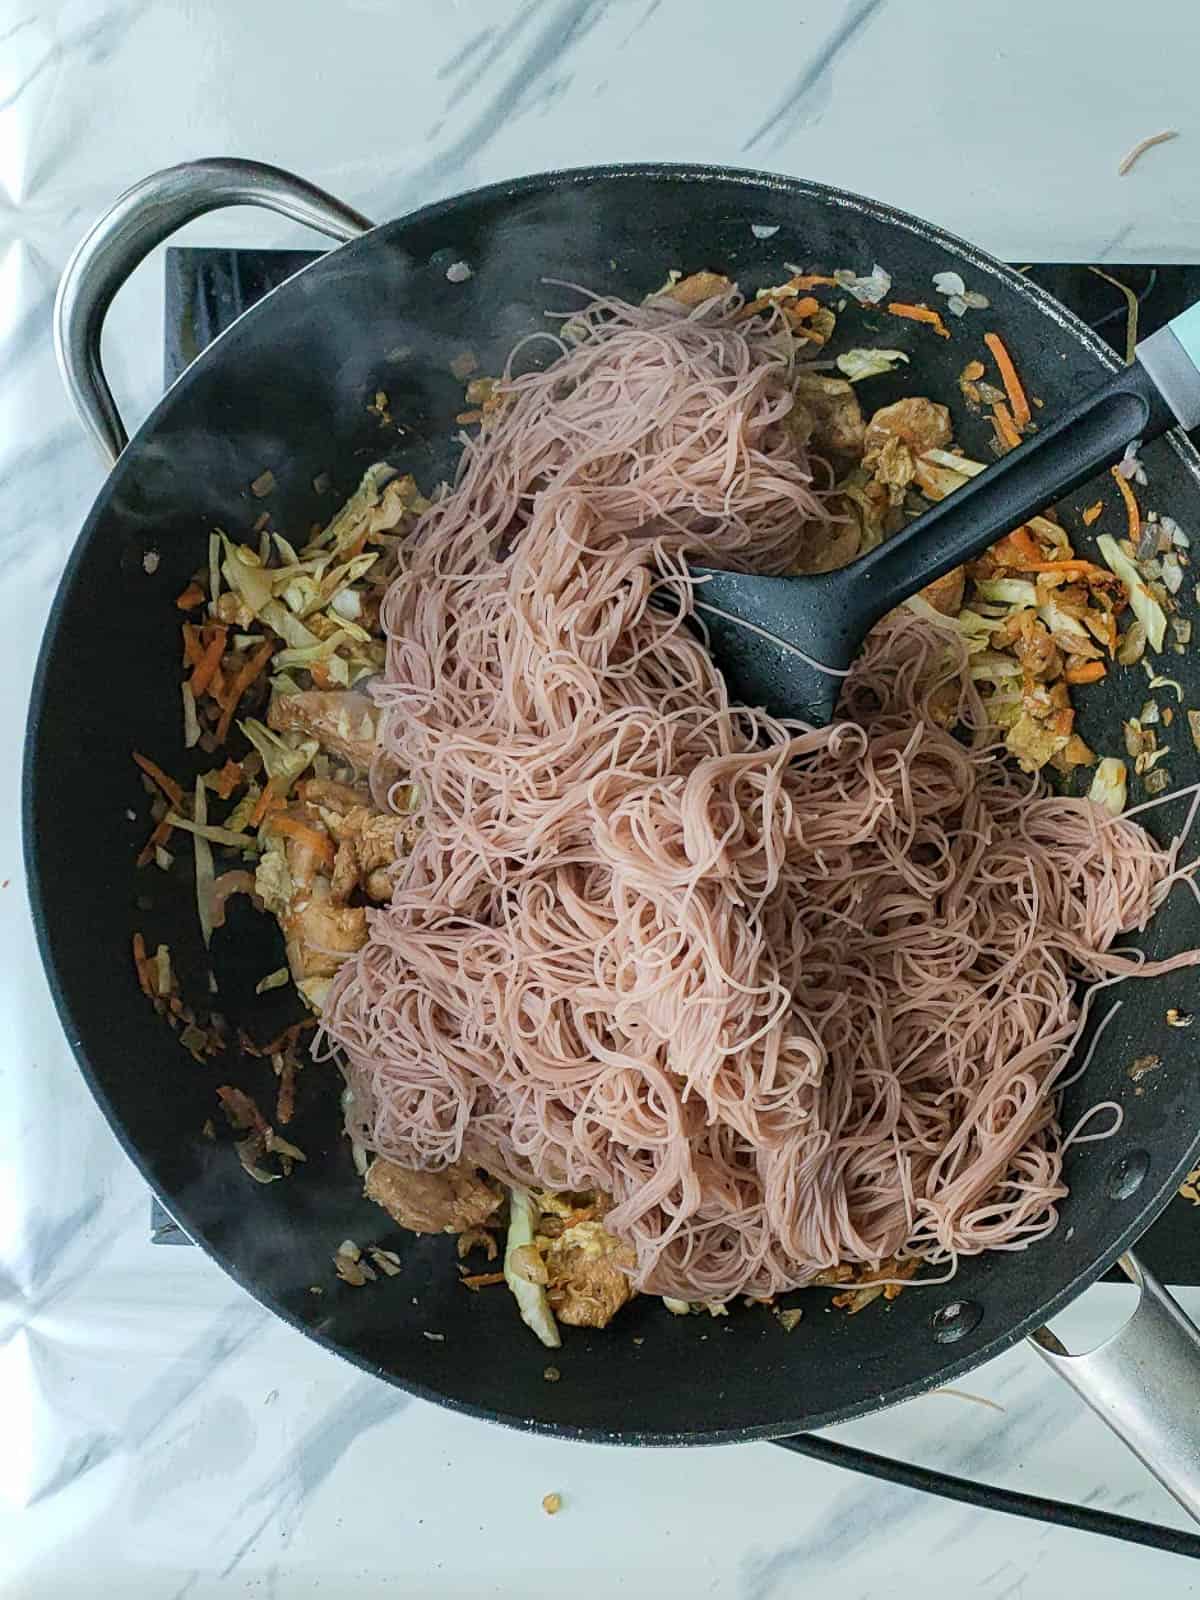 Rice vermicelli being stir-fried with vegetables in a non-stick wok.